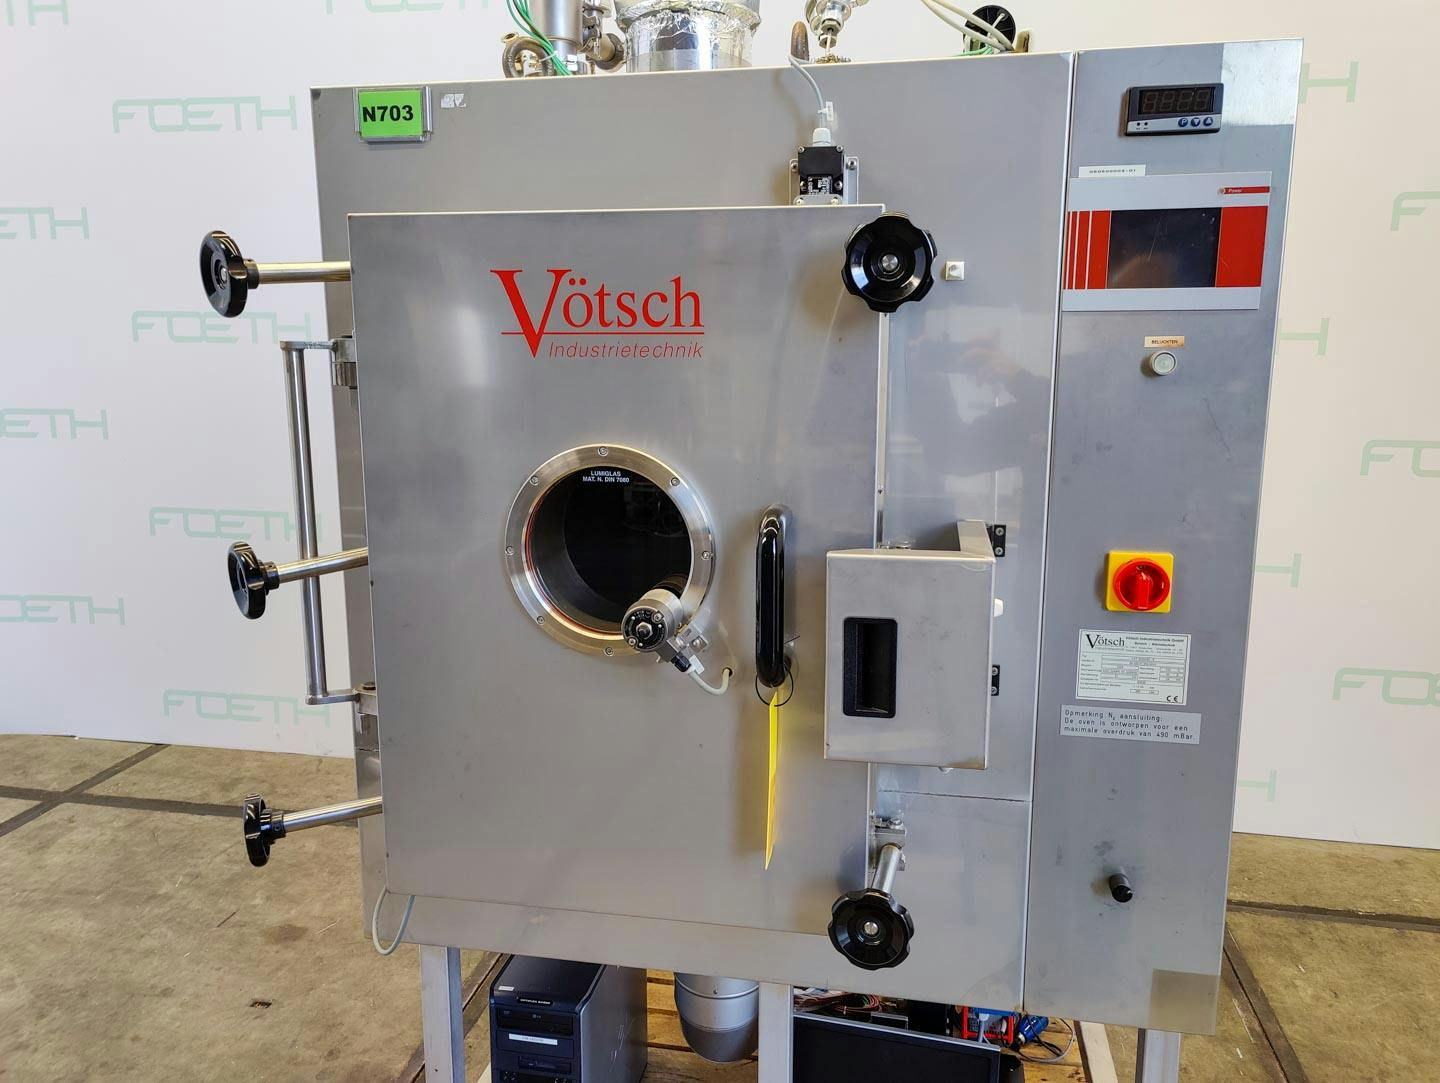 Vötsch VVT 50/65/80 - vacuum drying oven - Drying oven - image 7